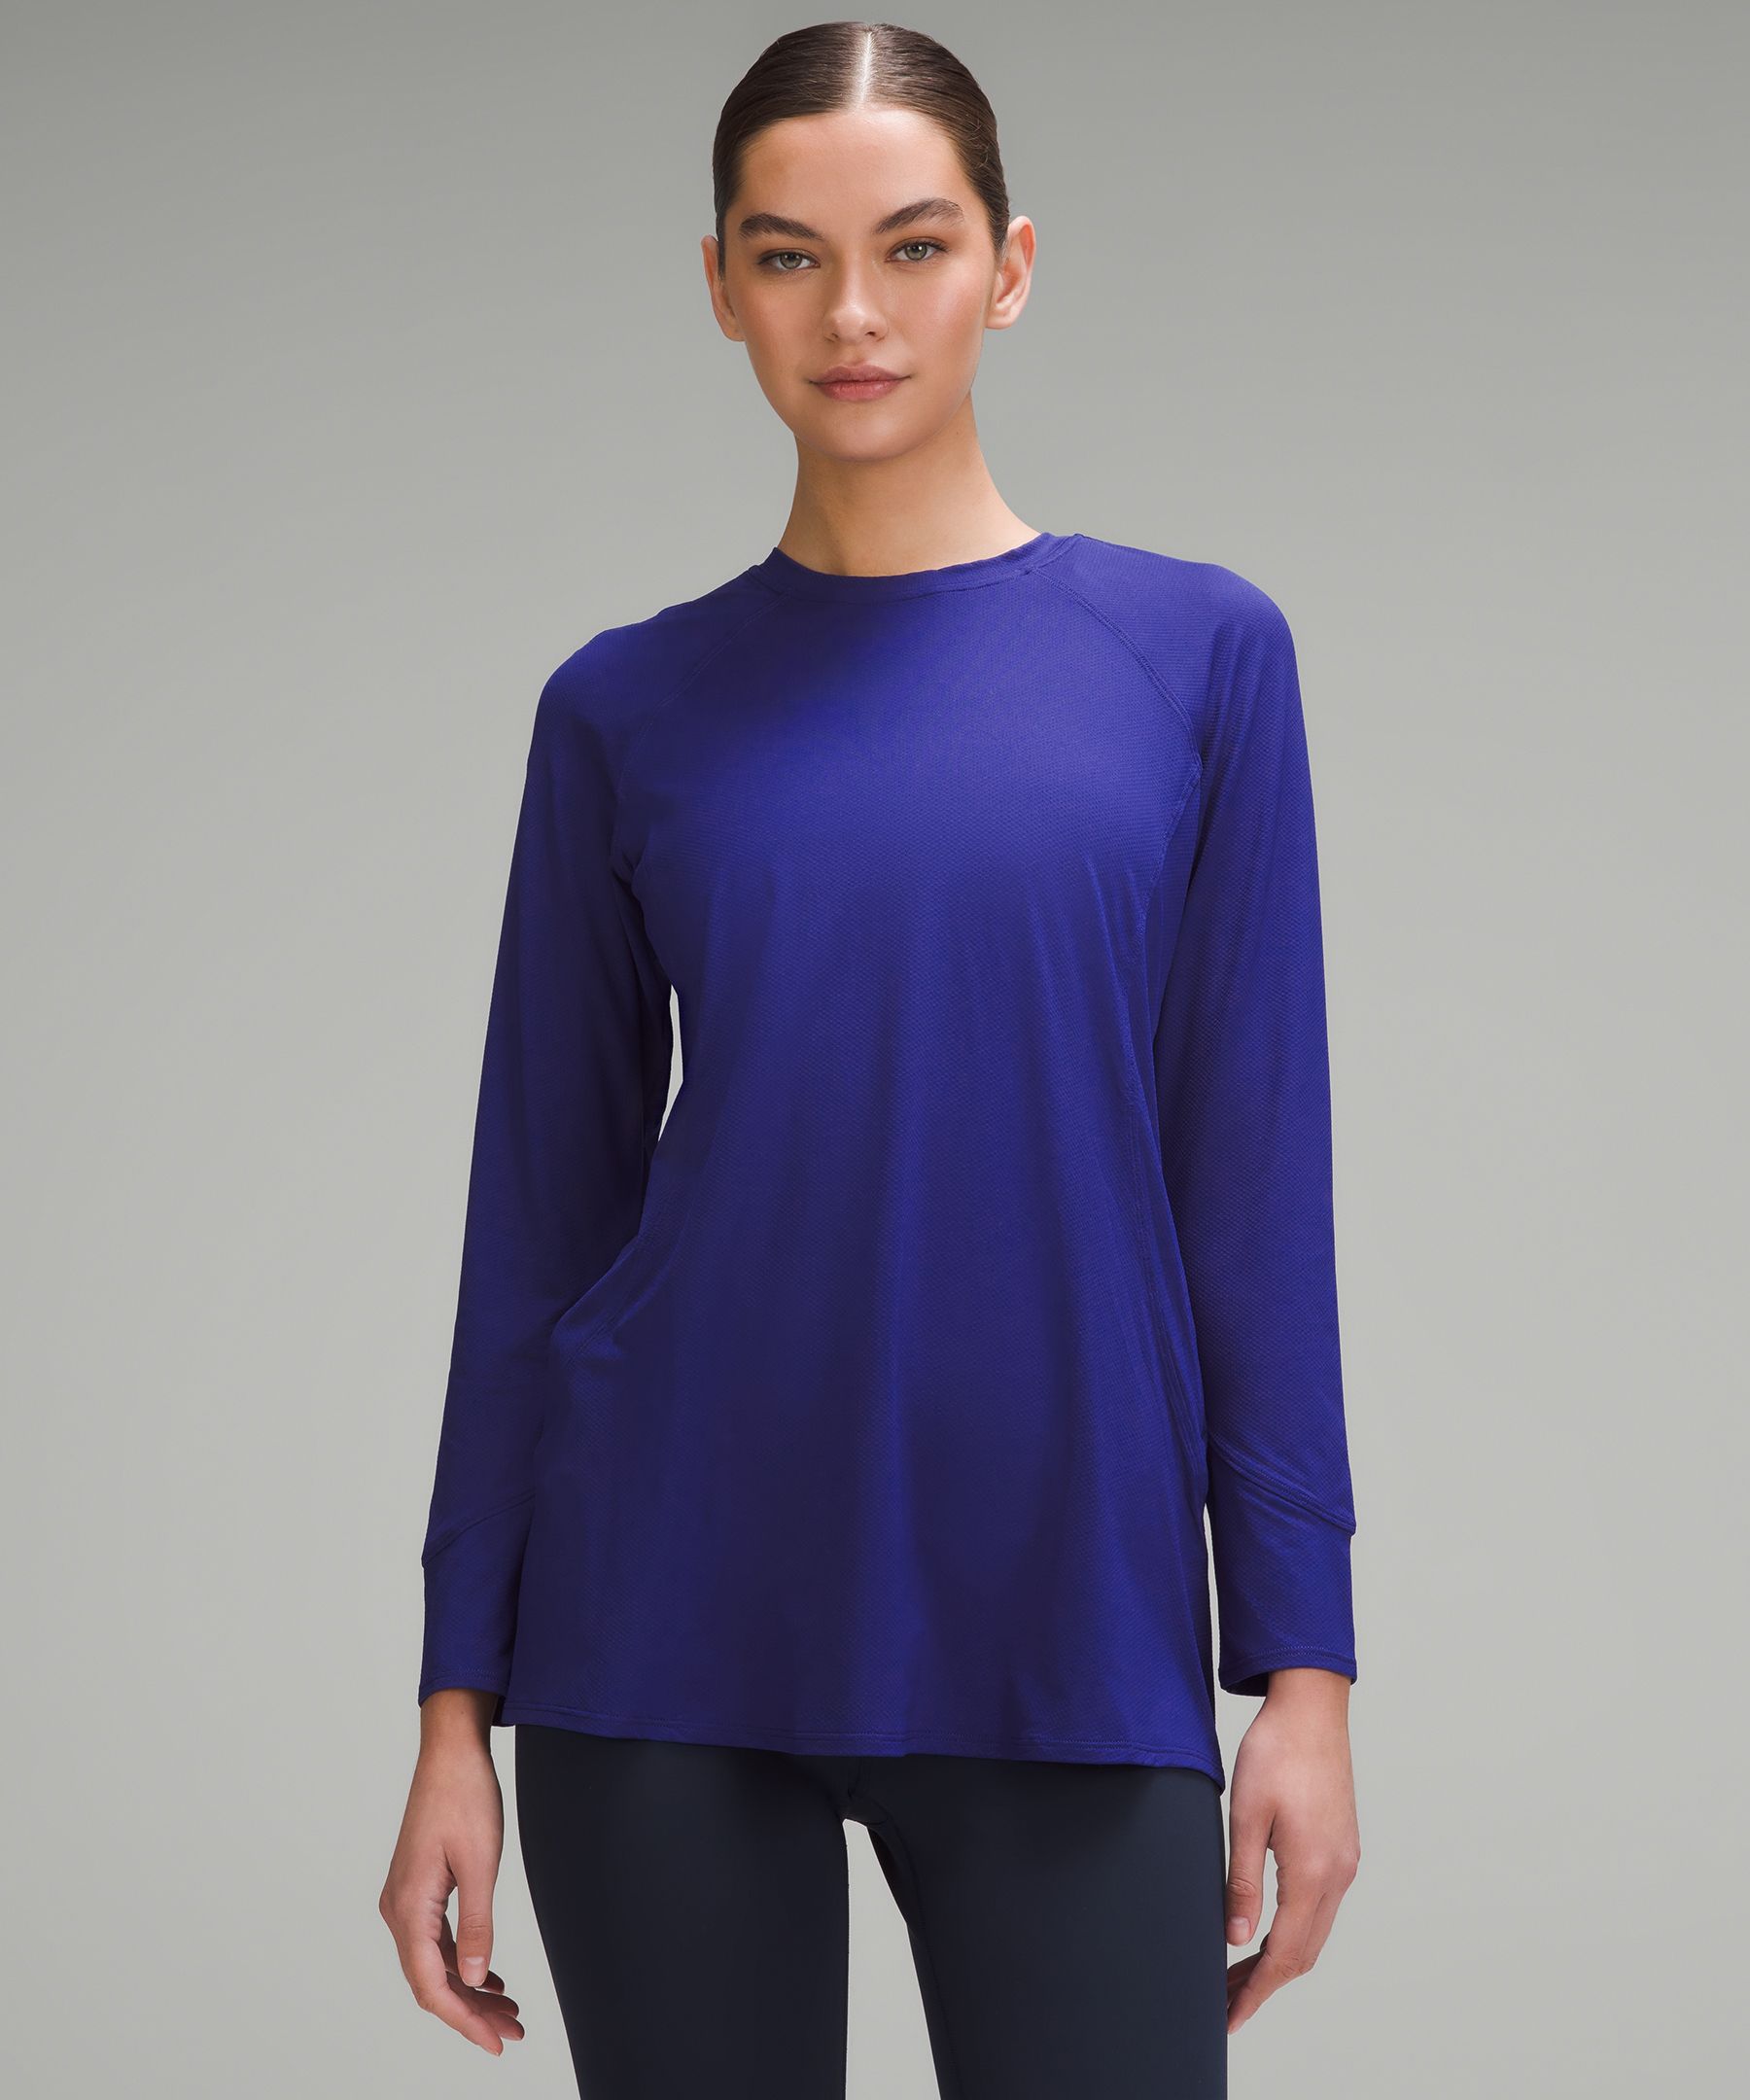 Abrasion-Resistant High-Coverage Long-Sleeve Shirt